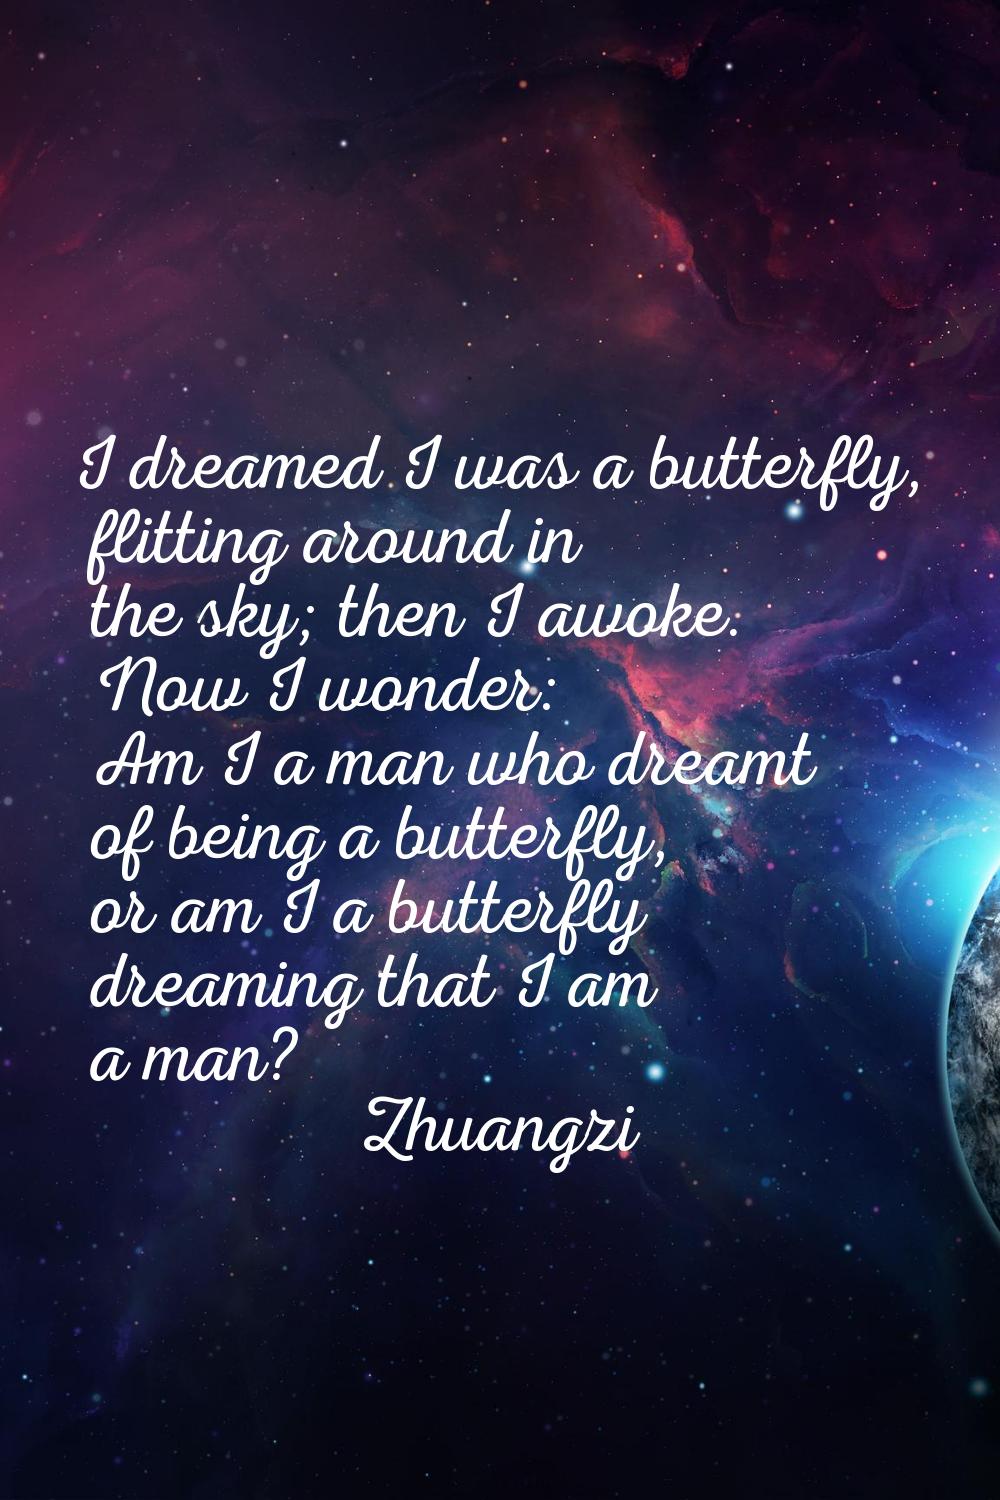 I dreamed I was a butterfly, flitting around in the sky; then I awoke. Now I wonder: Am I a man who